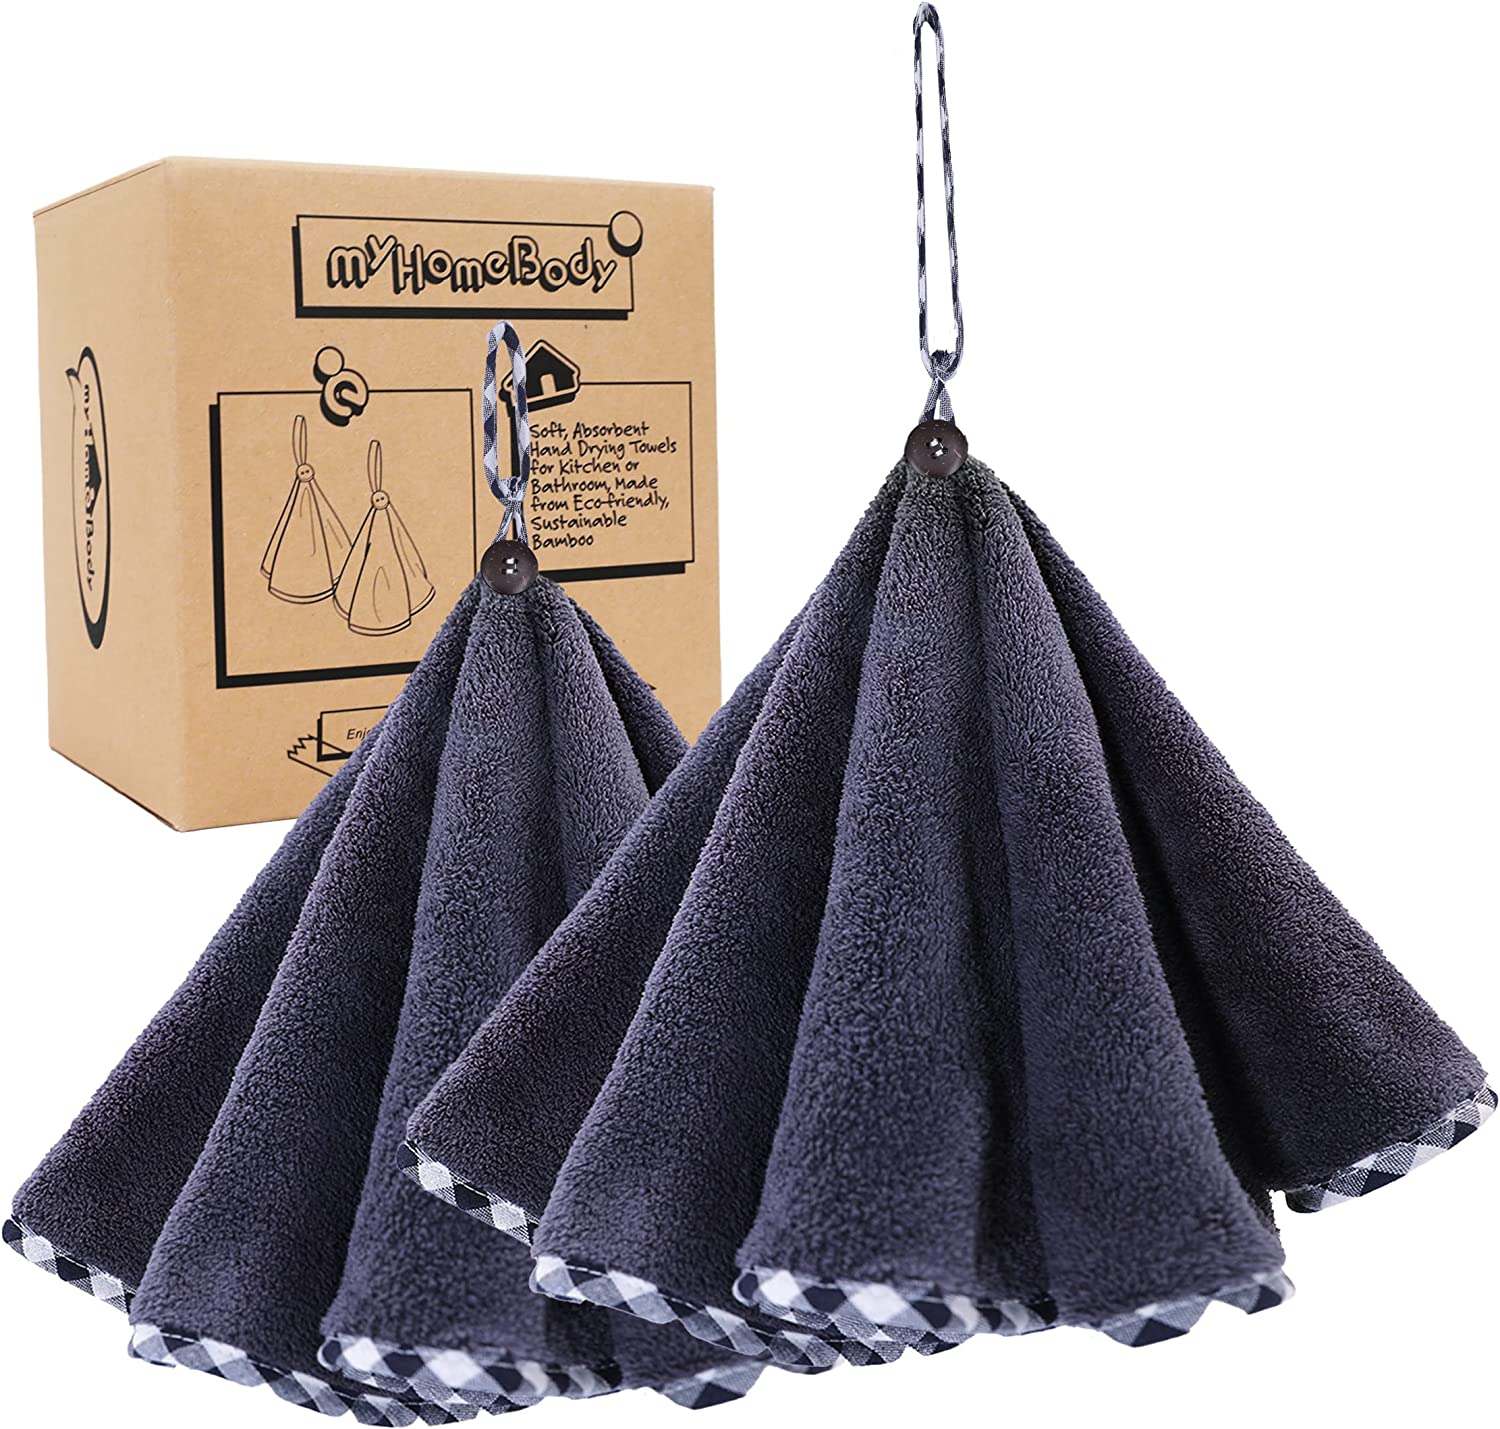 myHomeBody Ultra-Soft Charcoal Fiber Hand Drying Towels for Bathroom and Kitchen